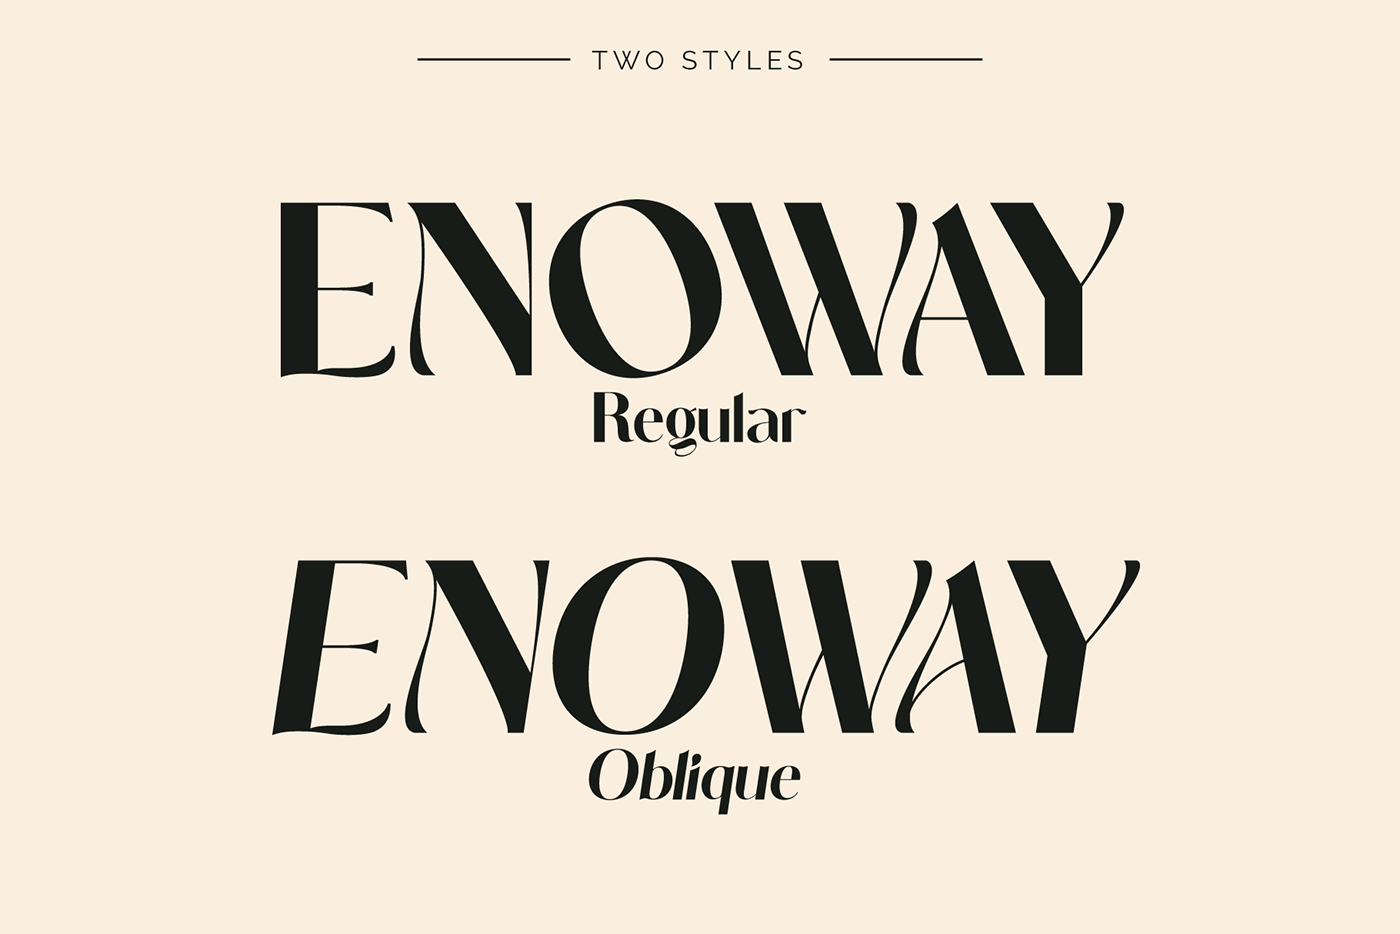 Display display font font fonts free Free font modern font type Typeface typography  